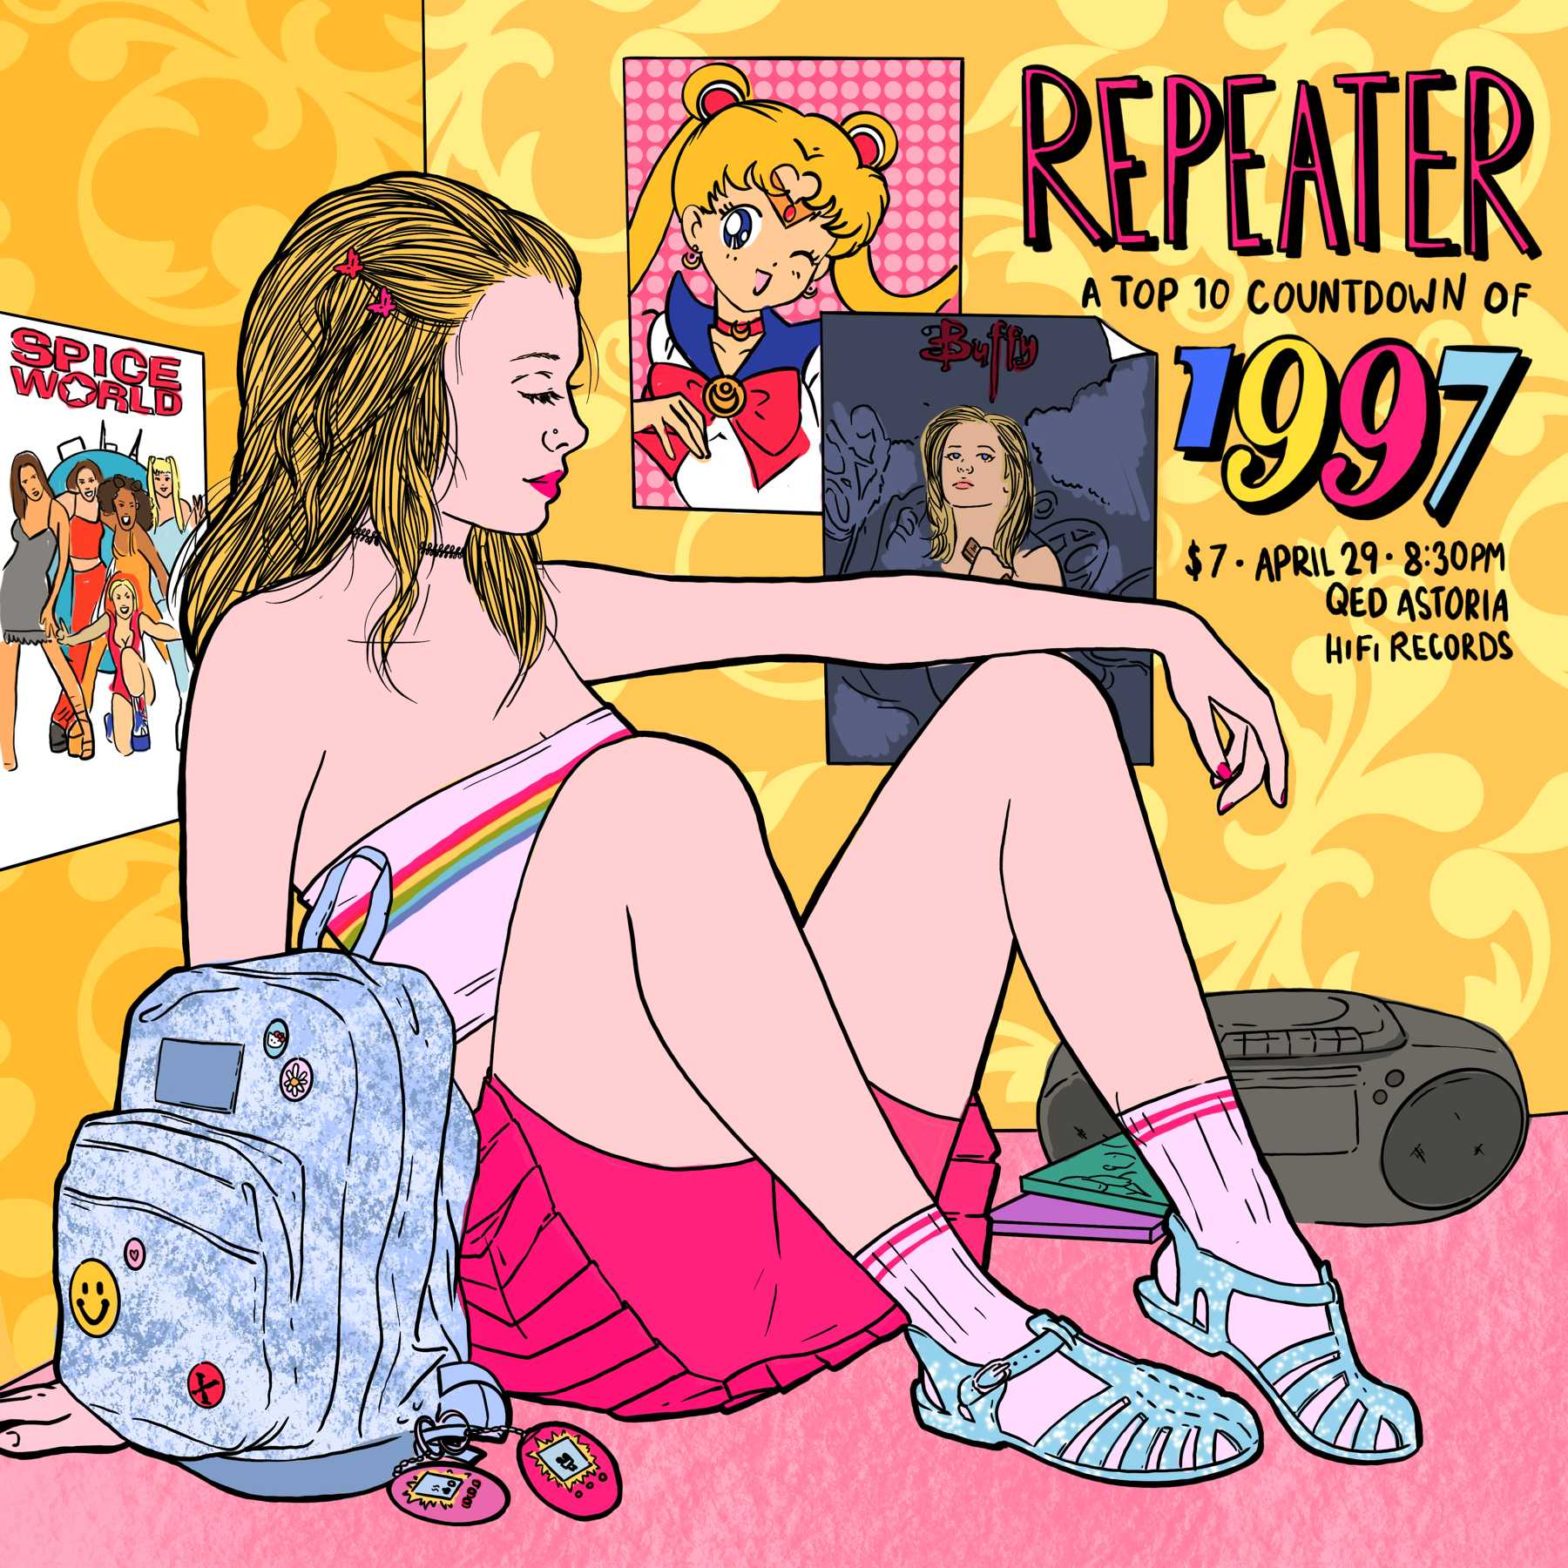 Live! Repeater’s Top 10* Countdown of 1997